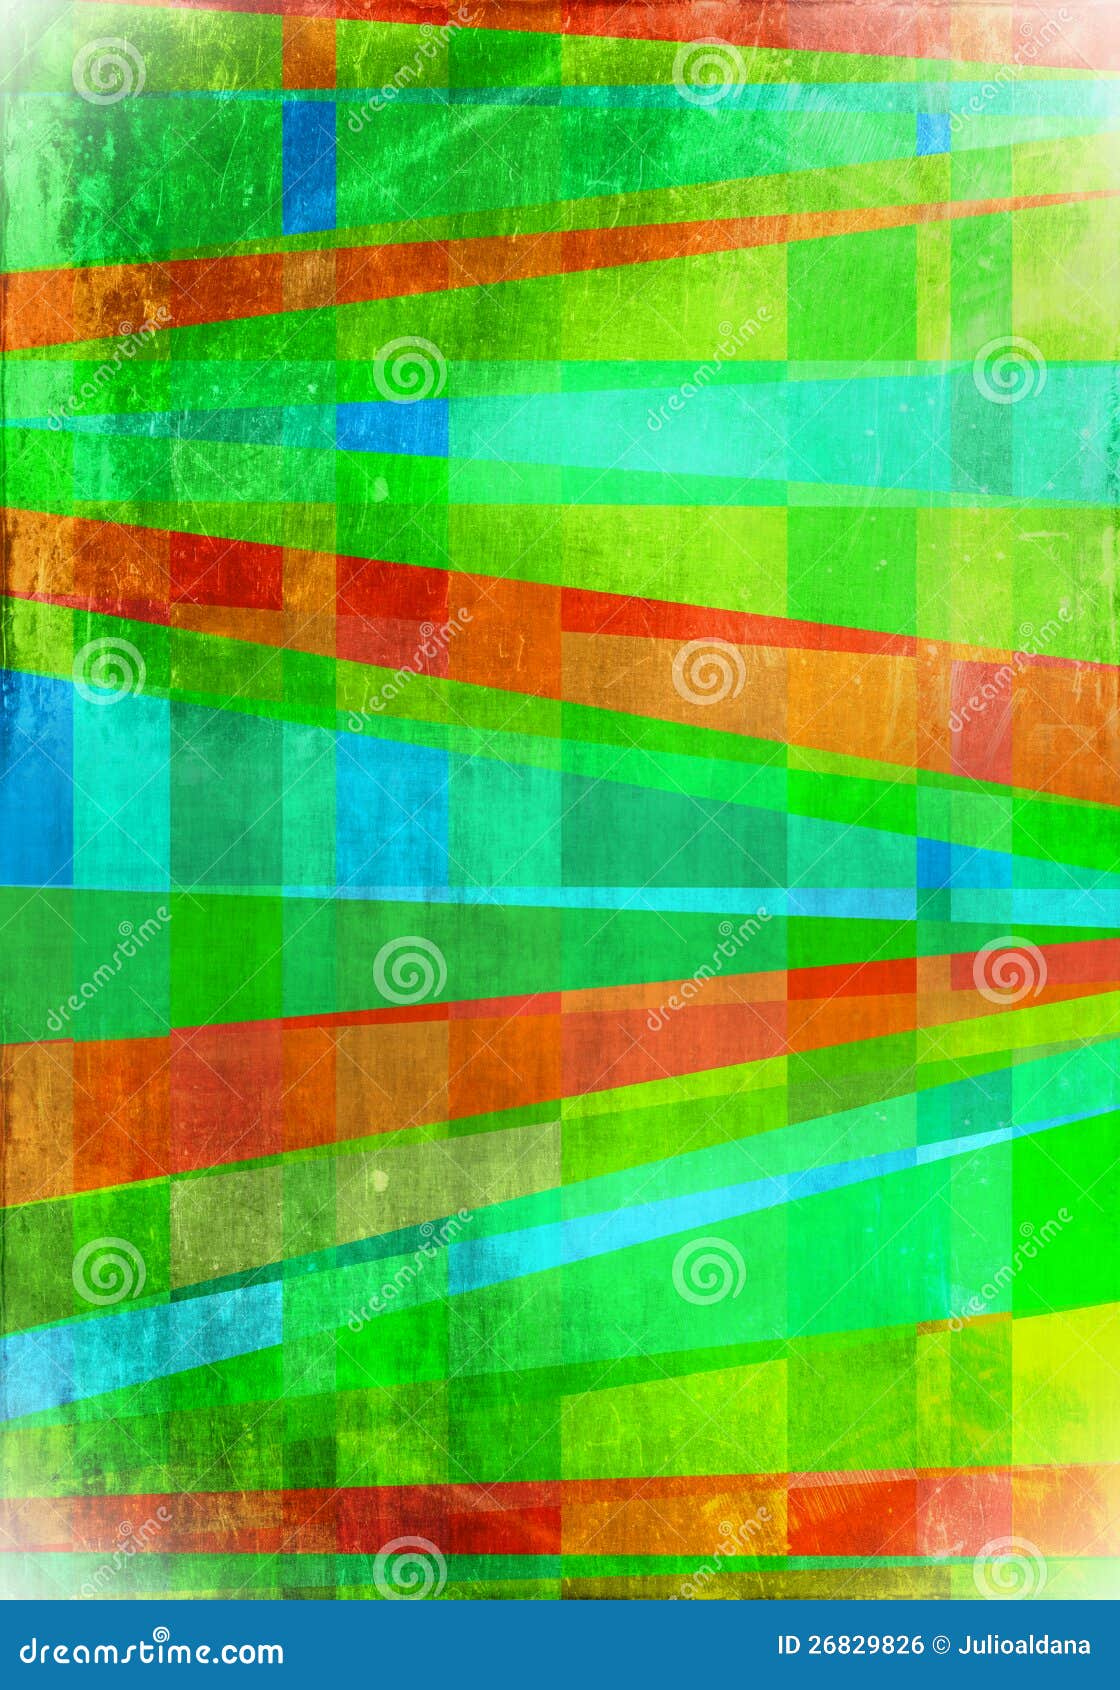 abstract surrealism artistic green background